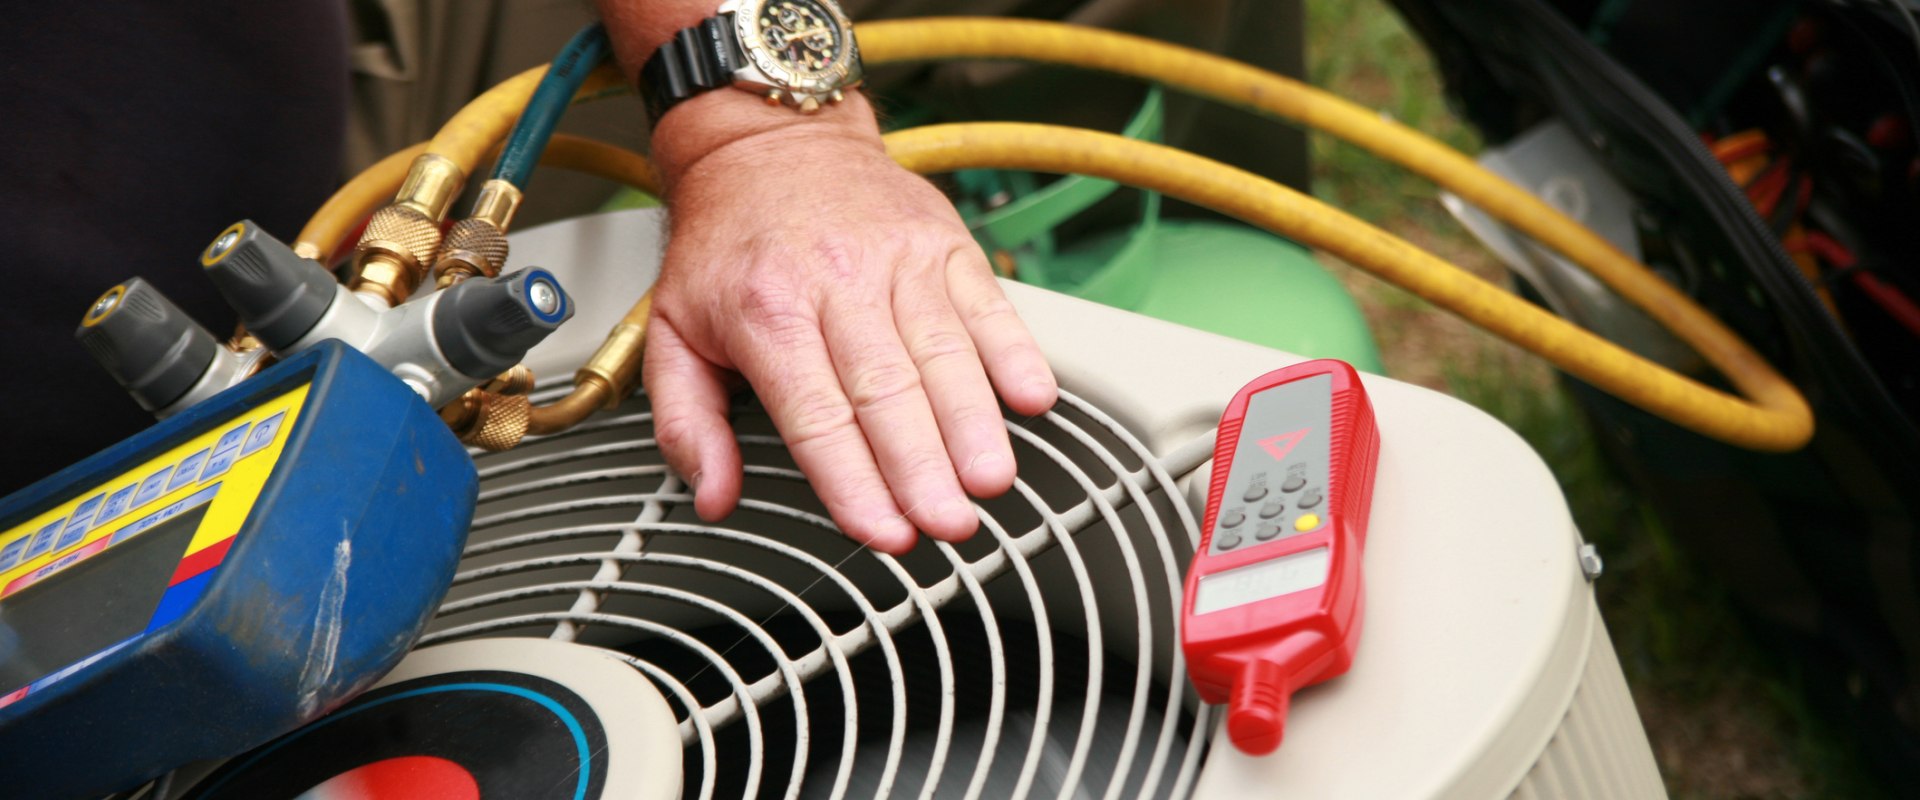 The Benefits of an Annual HVAC Tune Up